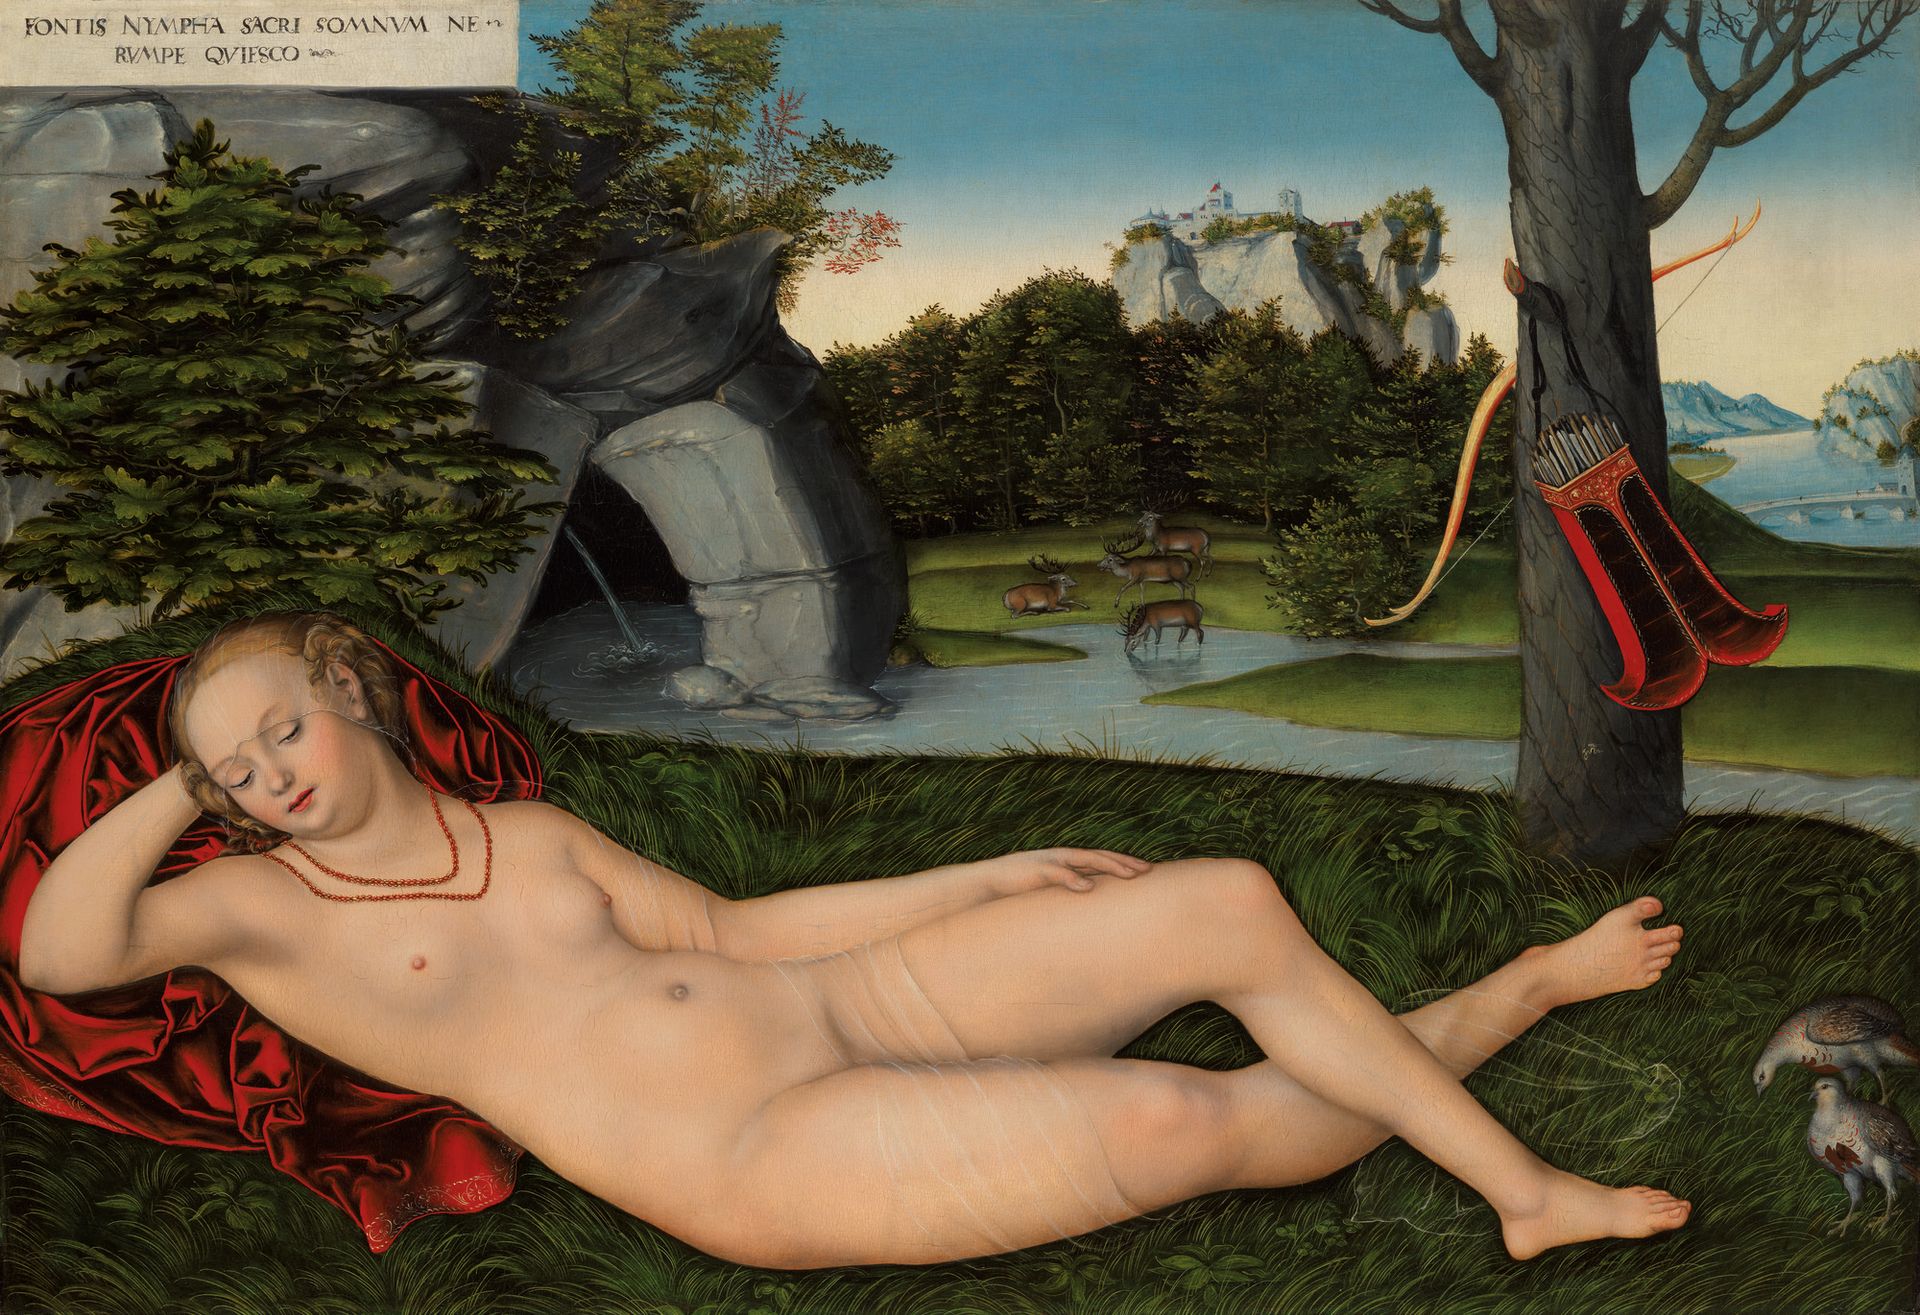 Lucas Cranach the Elder’s early 16th-century Nymph of the Spring sold at Christie's in London for £9.4m, an auction record for the artist. CHRISTIE'S IMAGES LTD. 2022